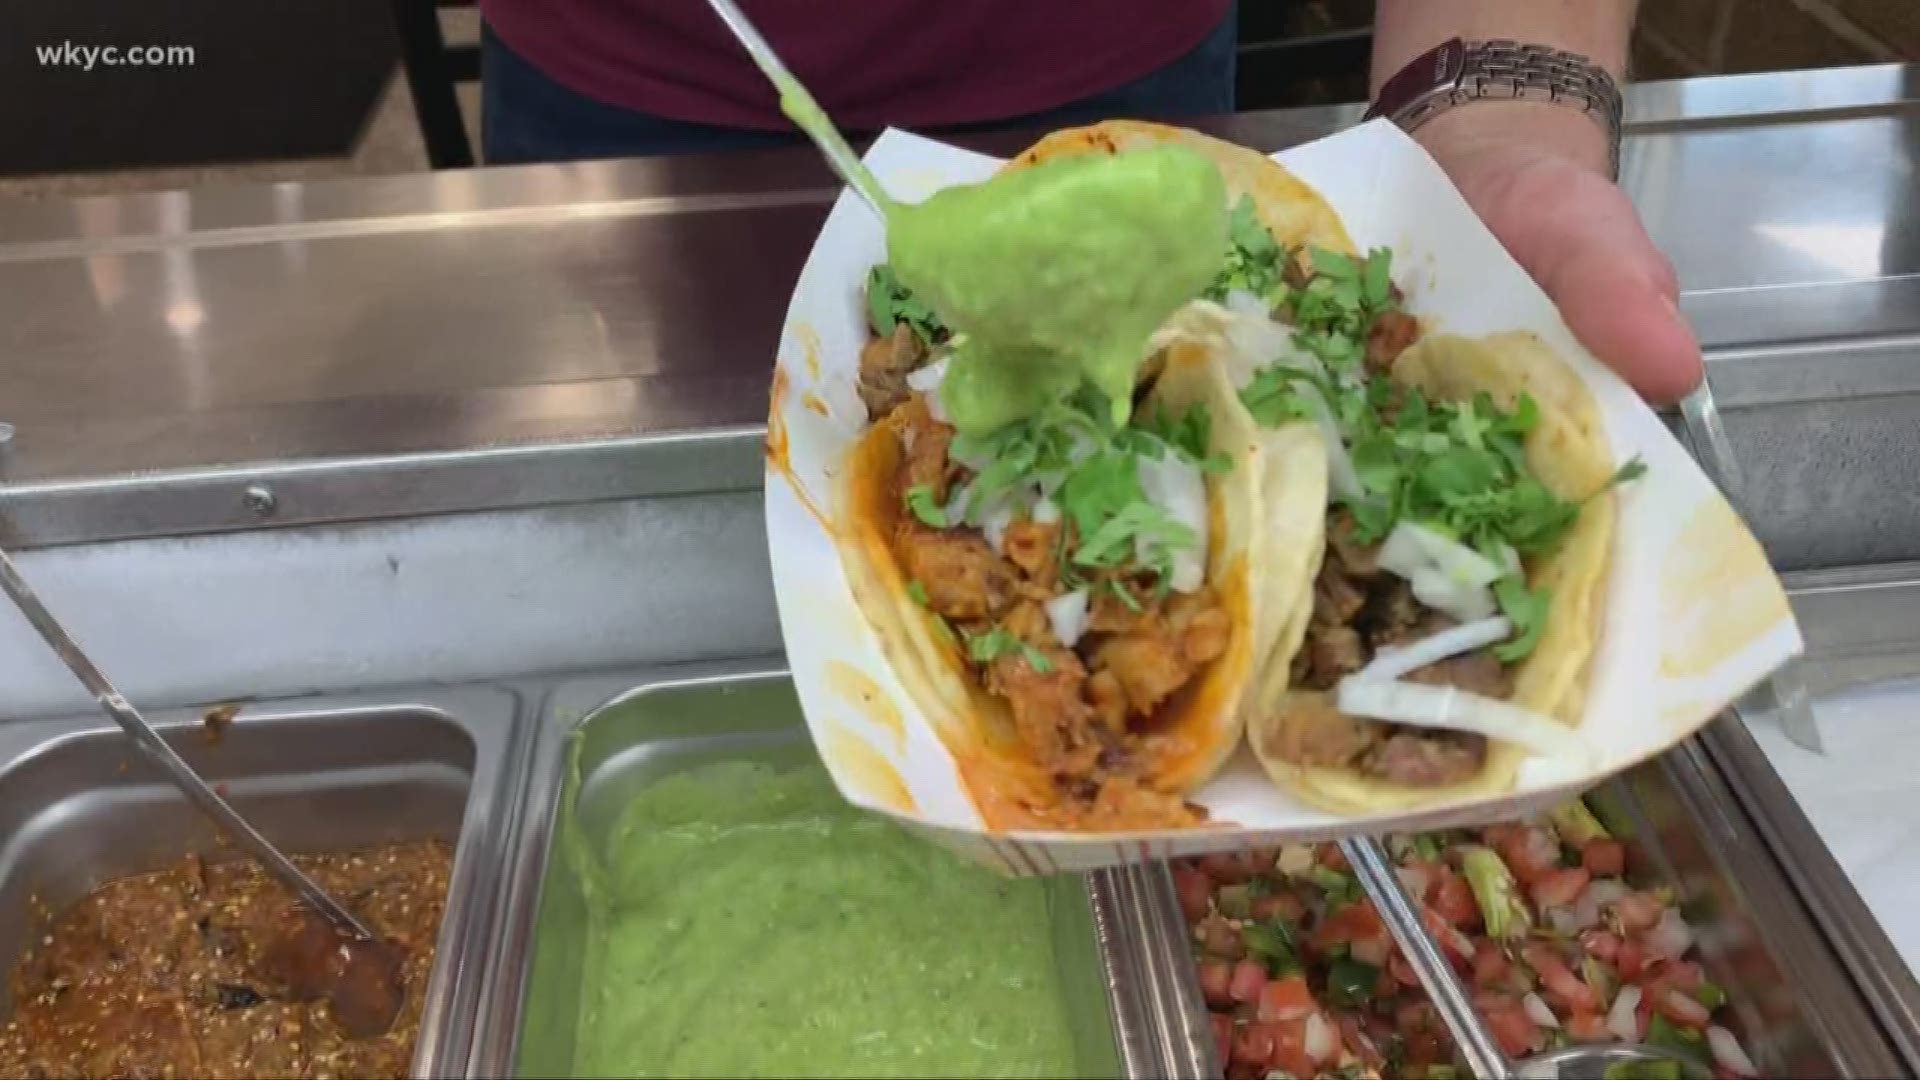 3 Northeast Ohio taco spots to try if you're tired of chains | wkyc.com